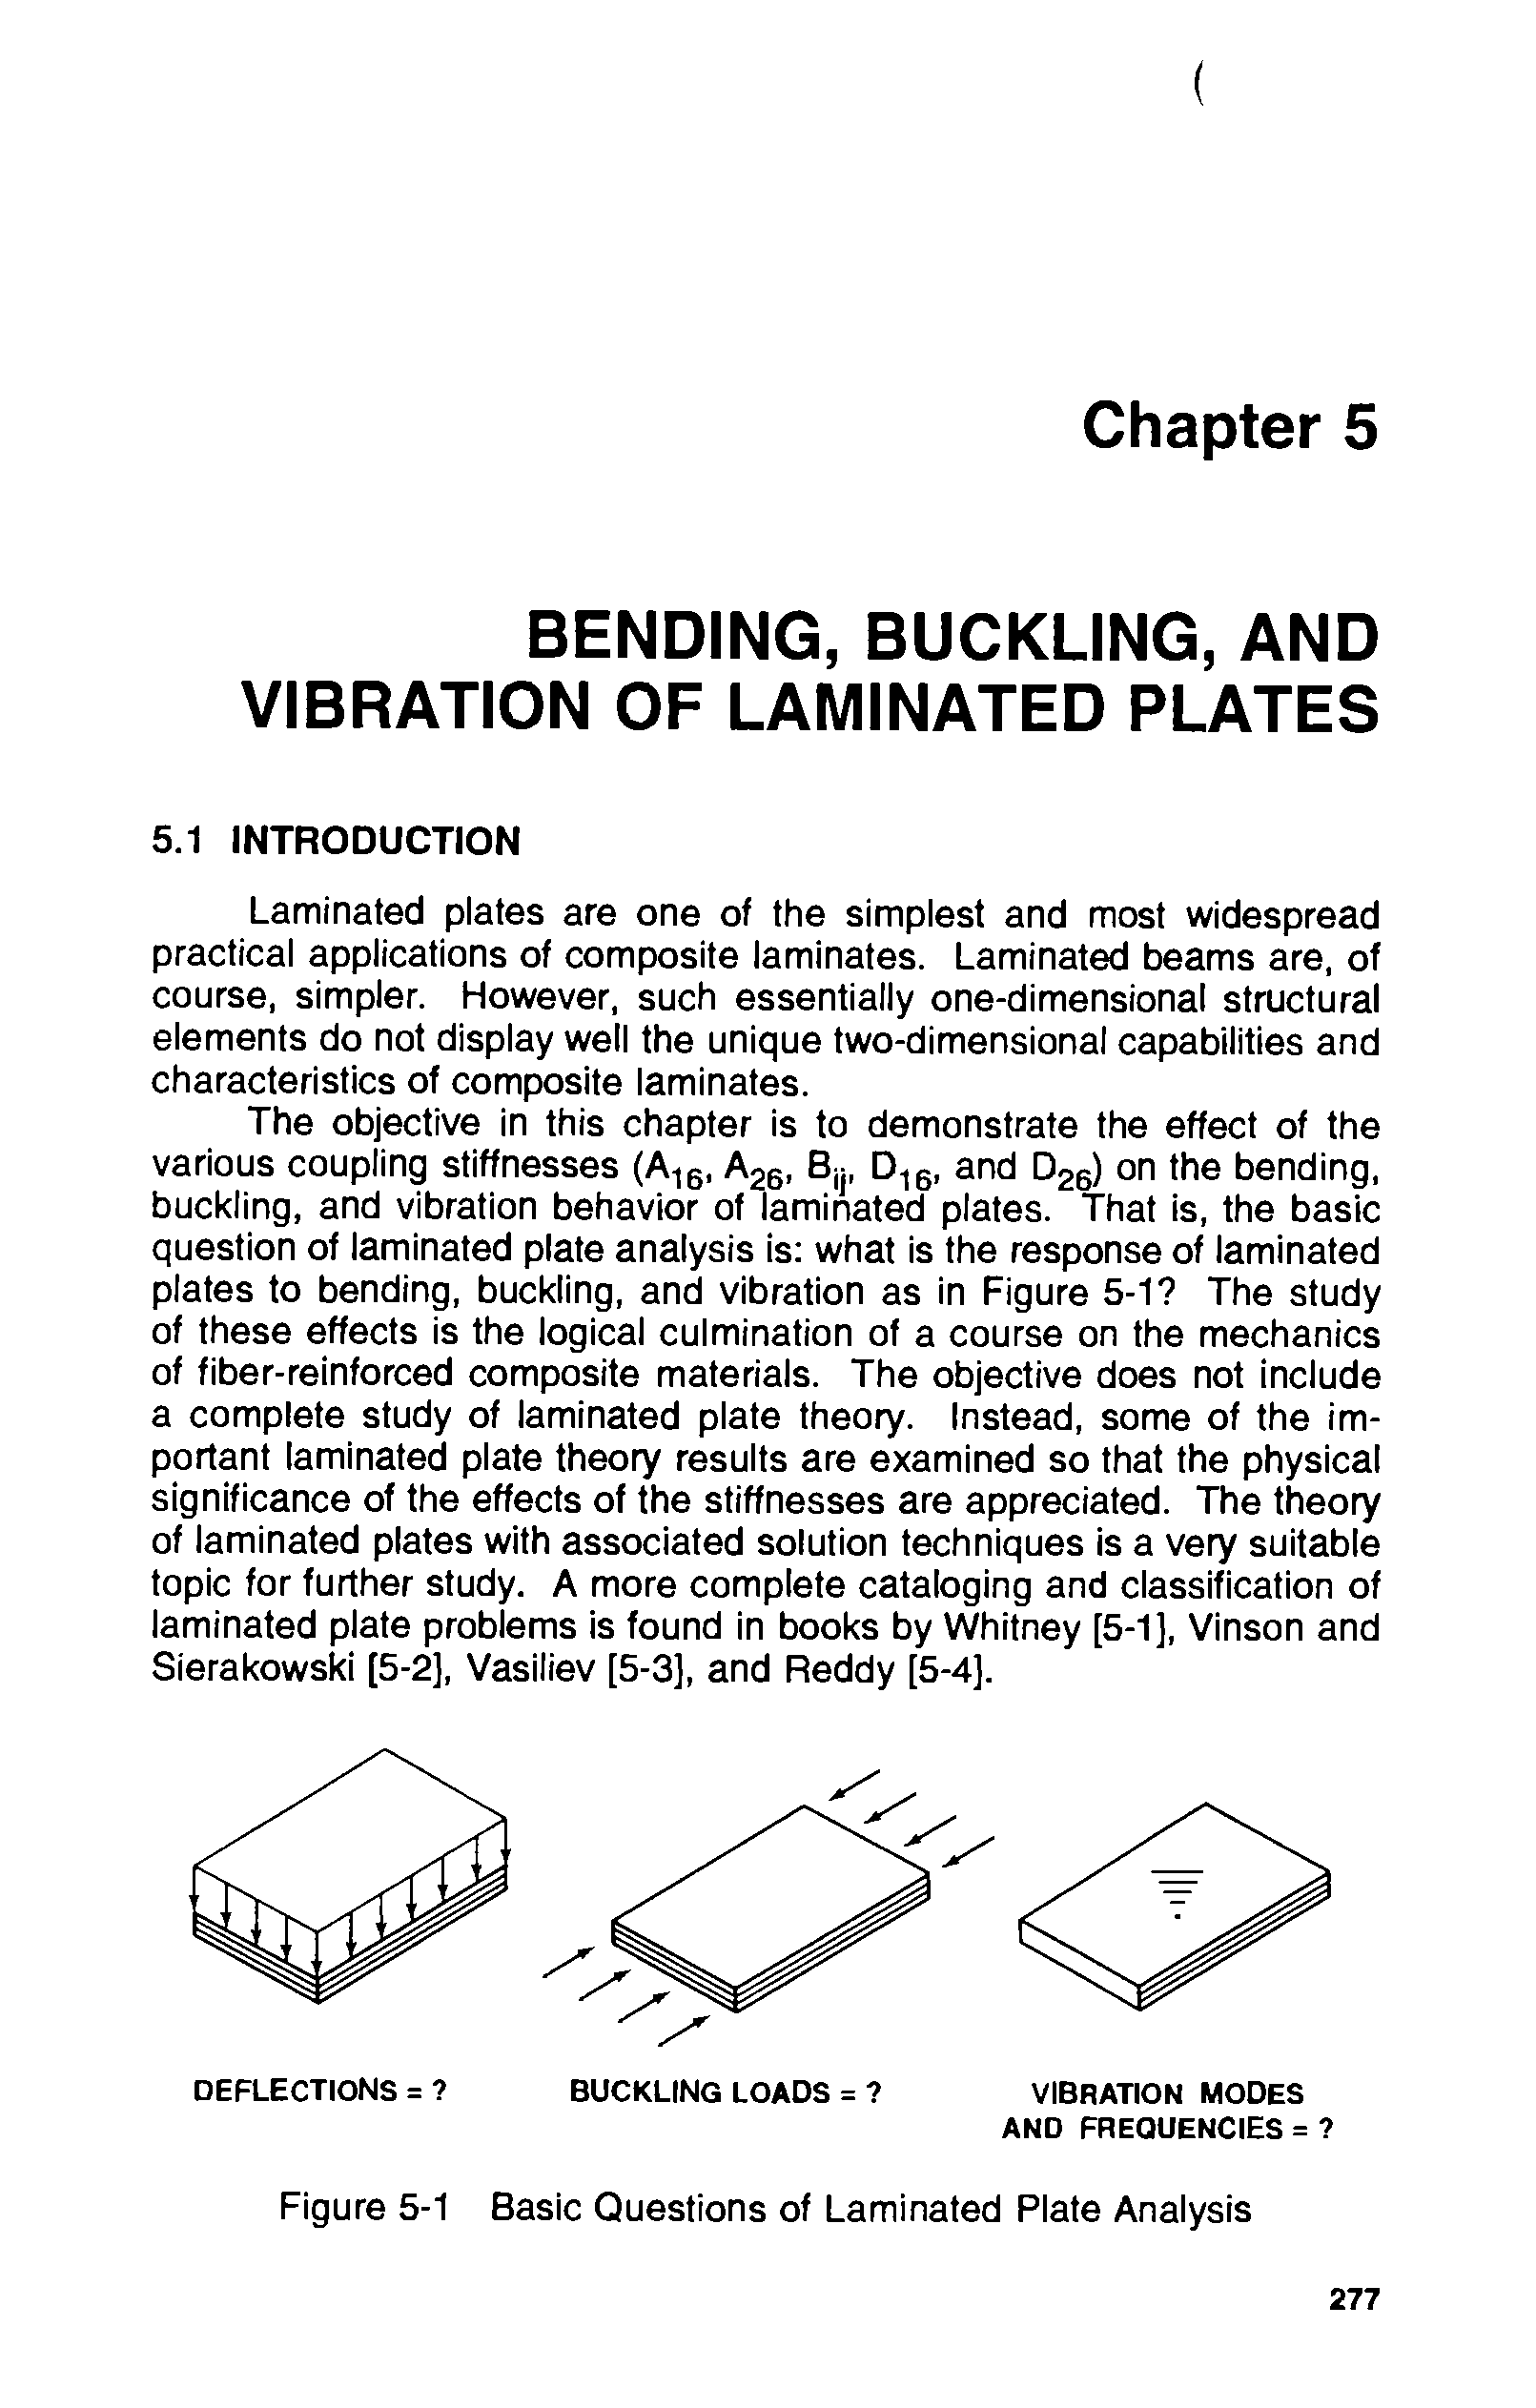 Figure 5-1 Basic Questions of Laminated Plate Analysis...